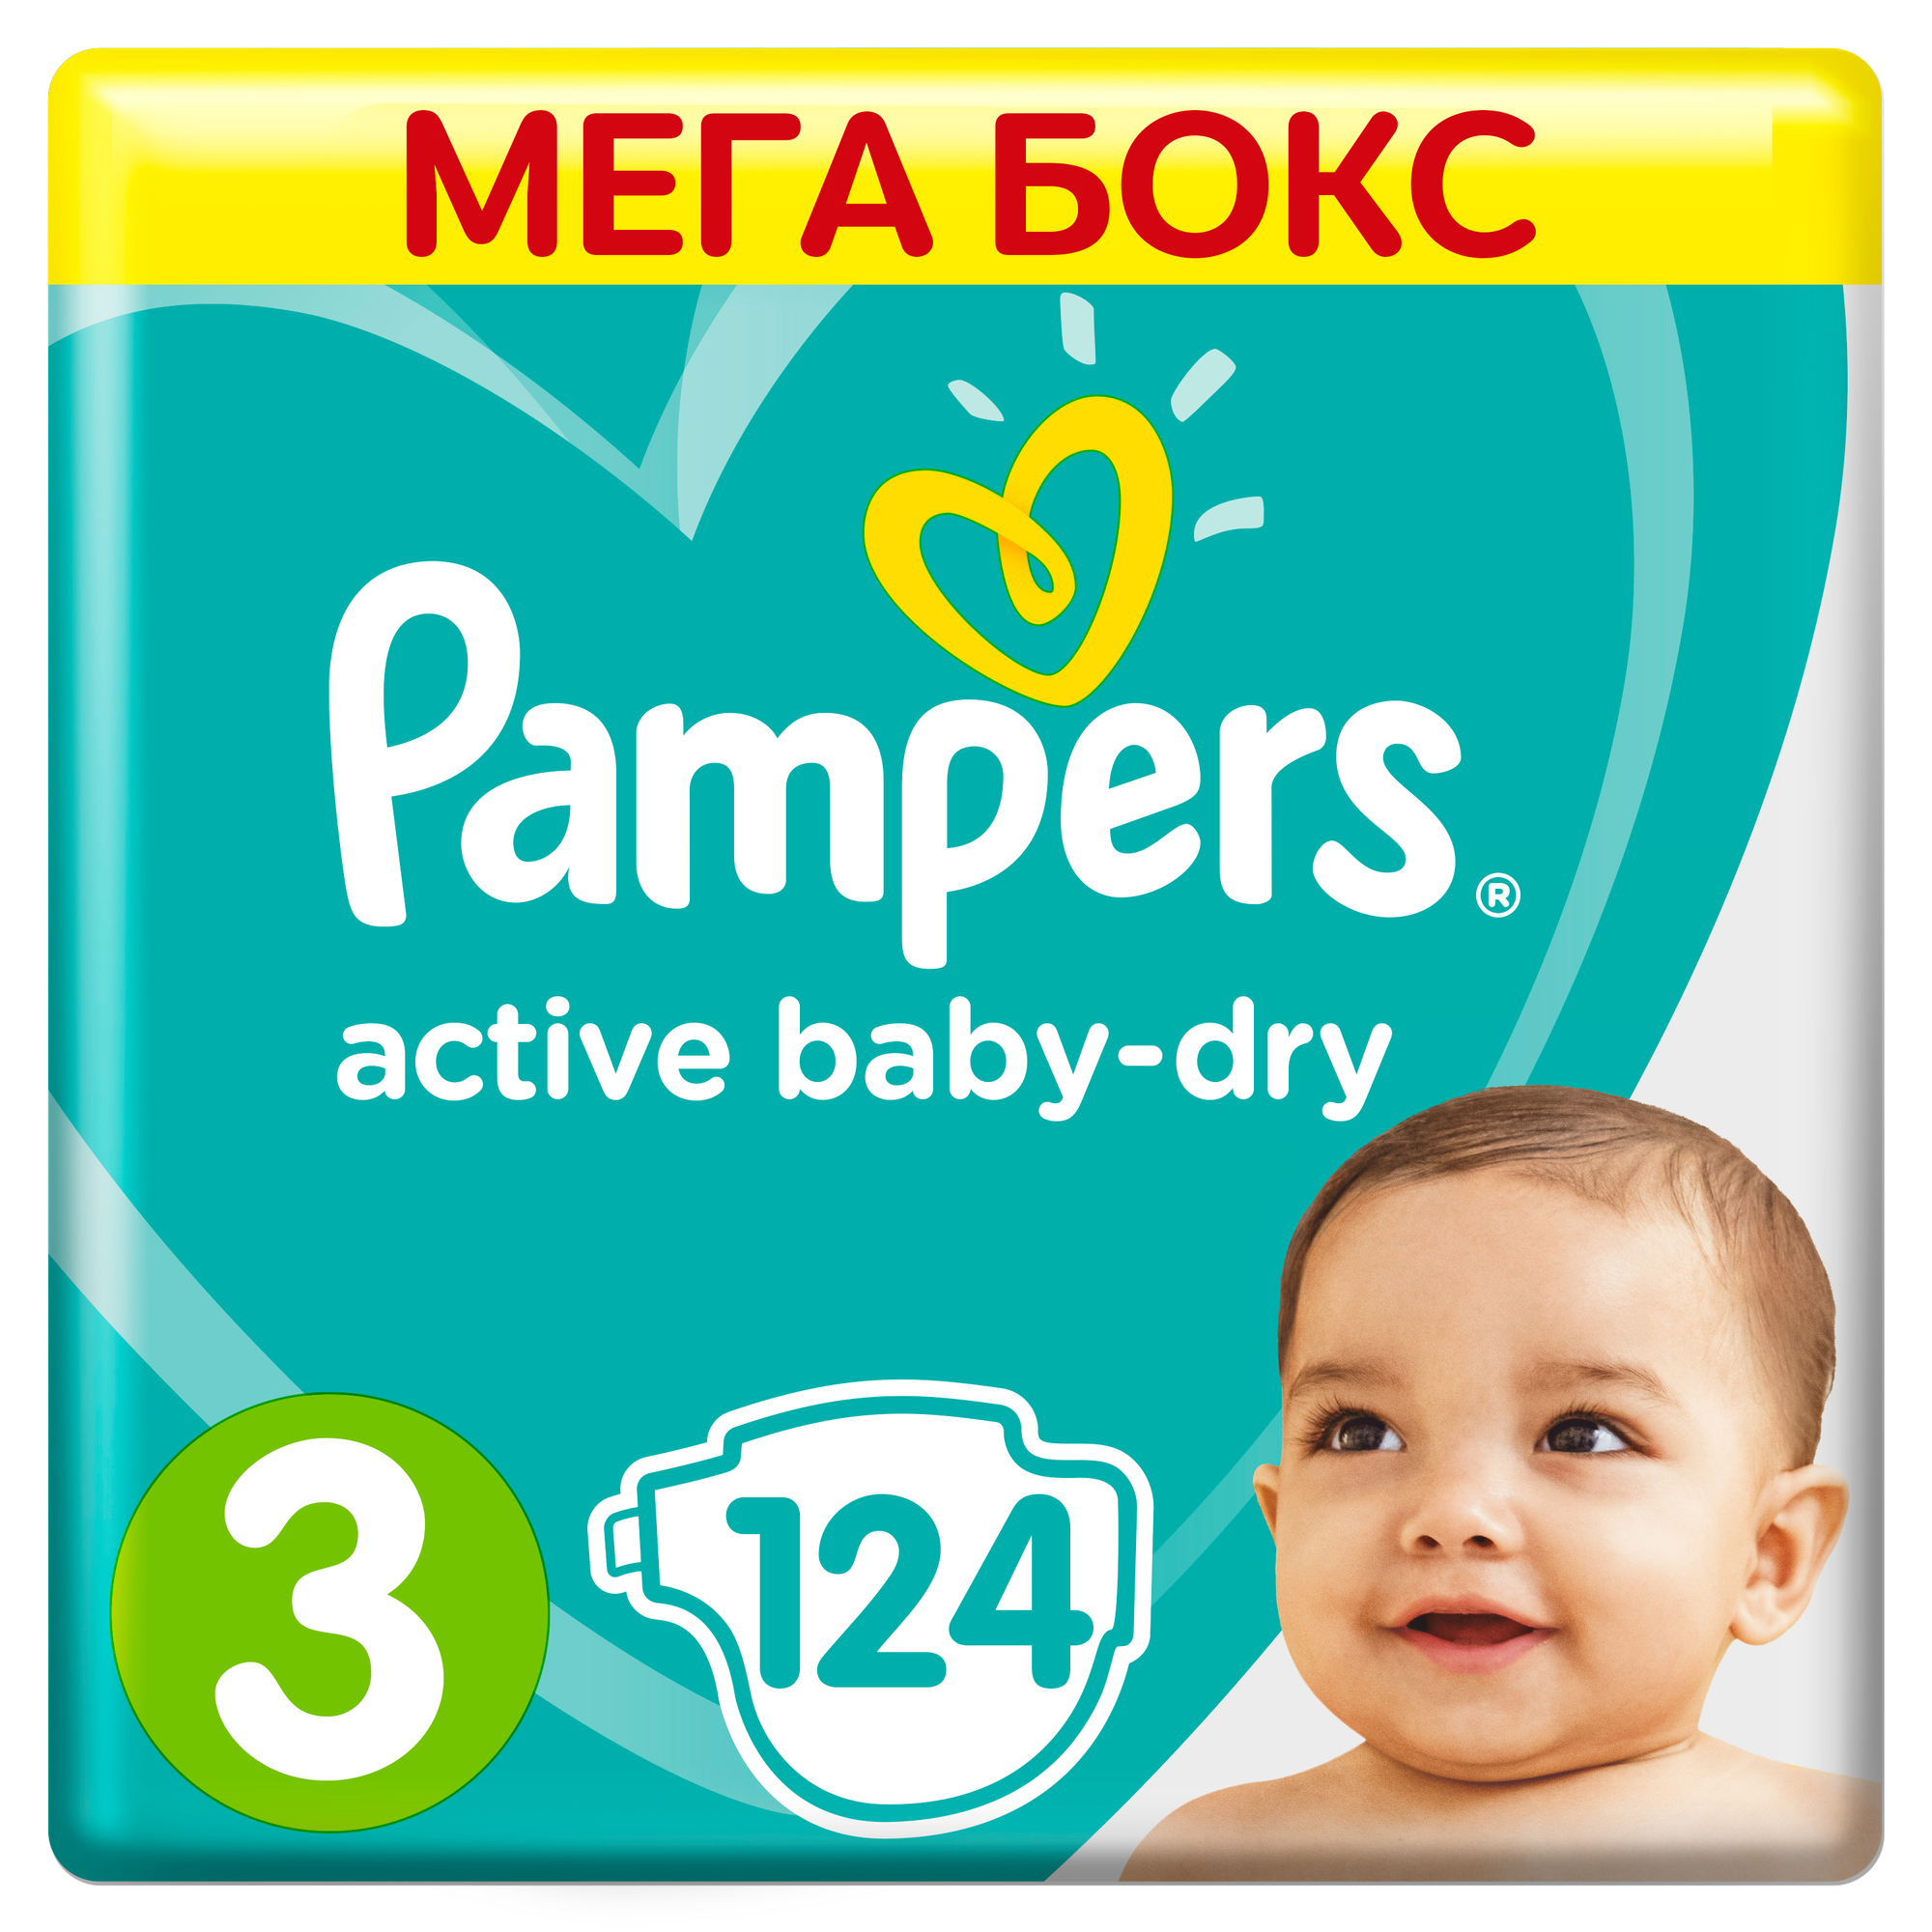  Pampers Active Baby-Dry 610 ,  3, 124 .